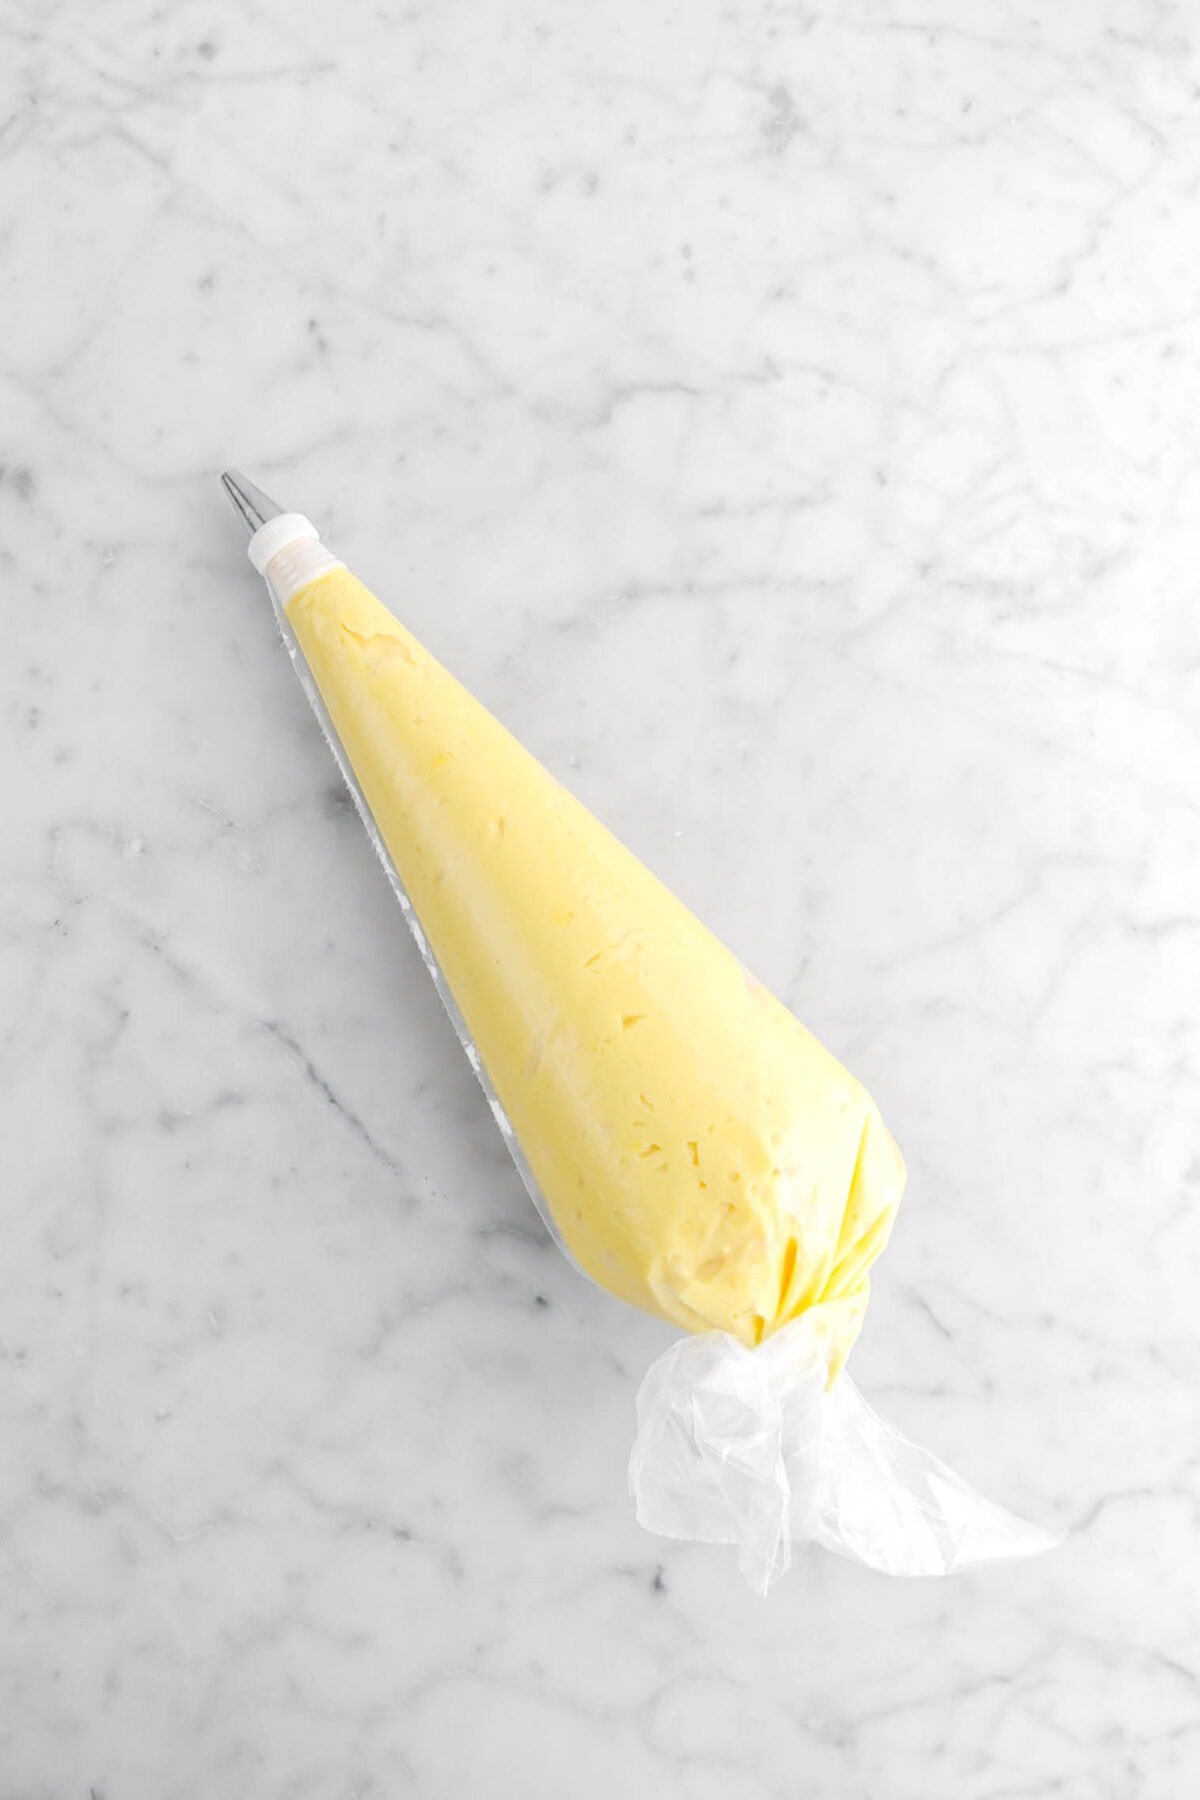 pastry cream in large piping bag on marble surface.